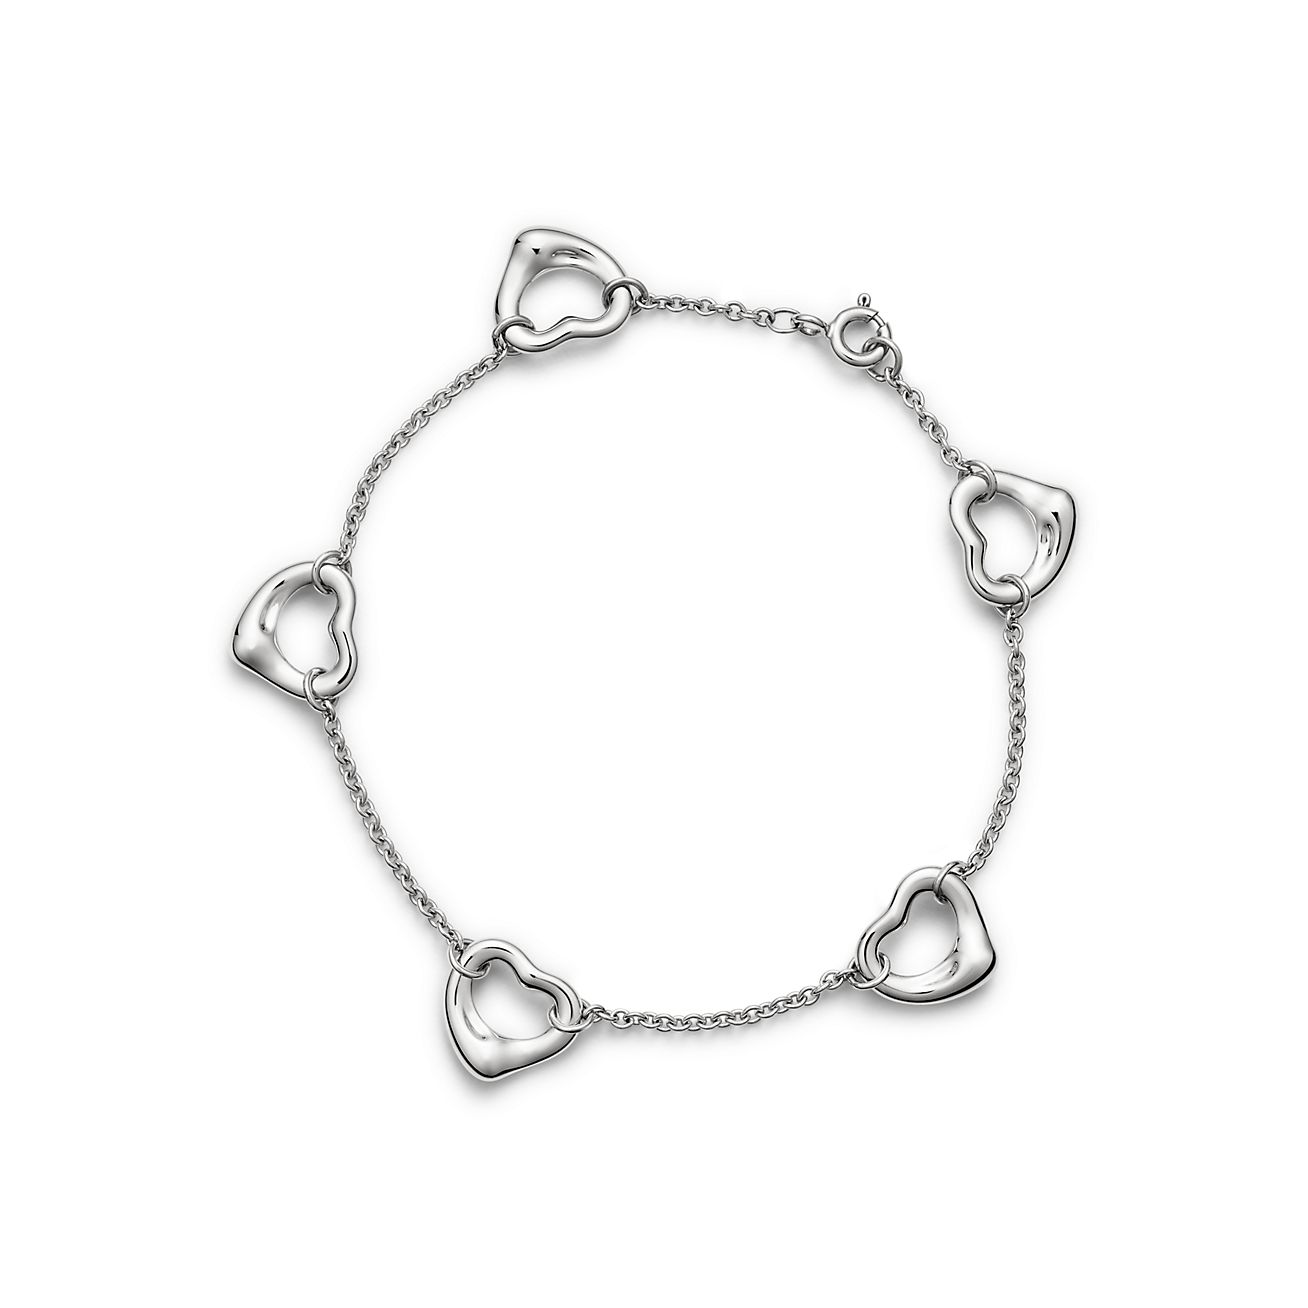 Details more than 72 tiffany silver heart bracelet latest